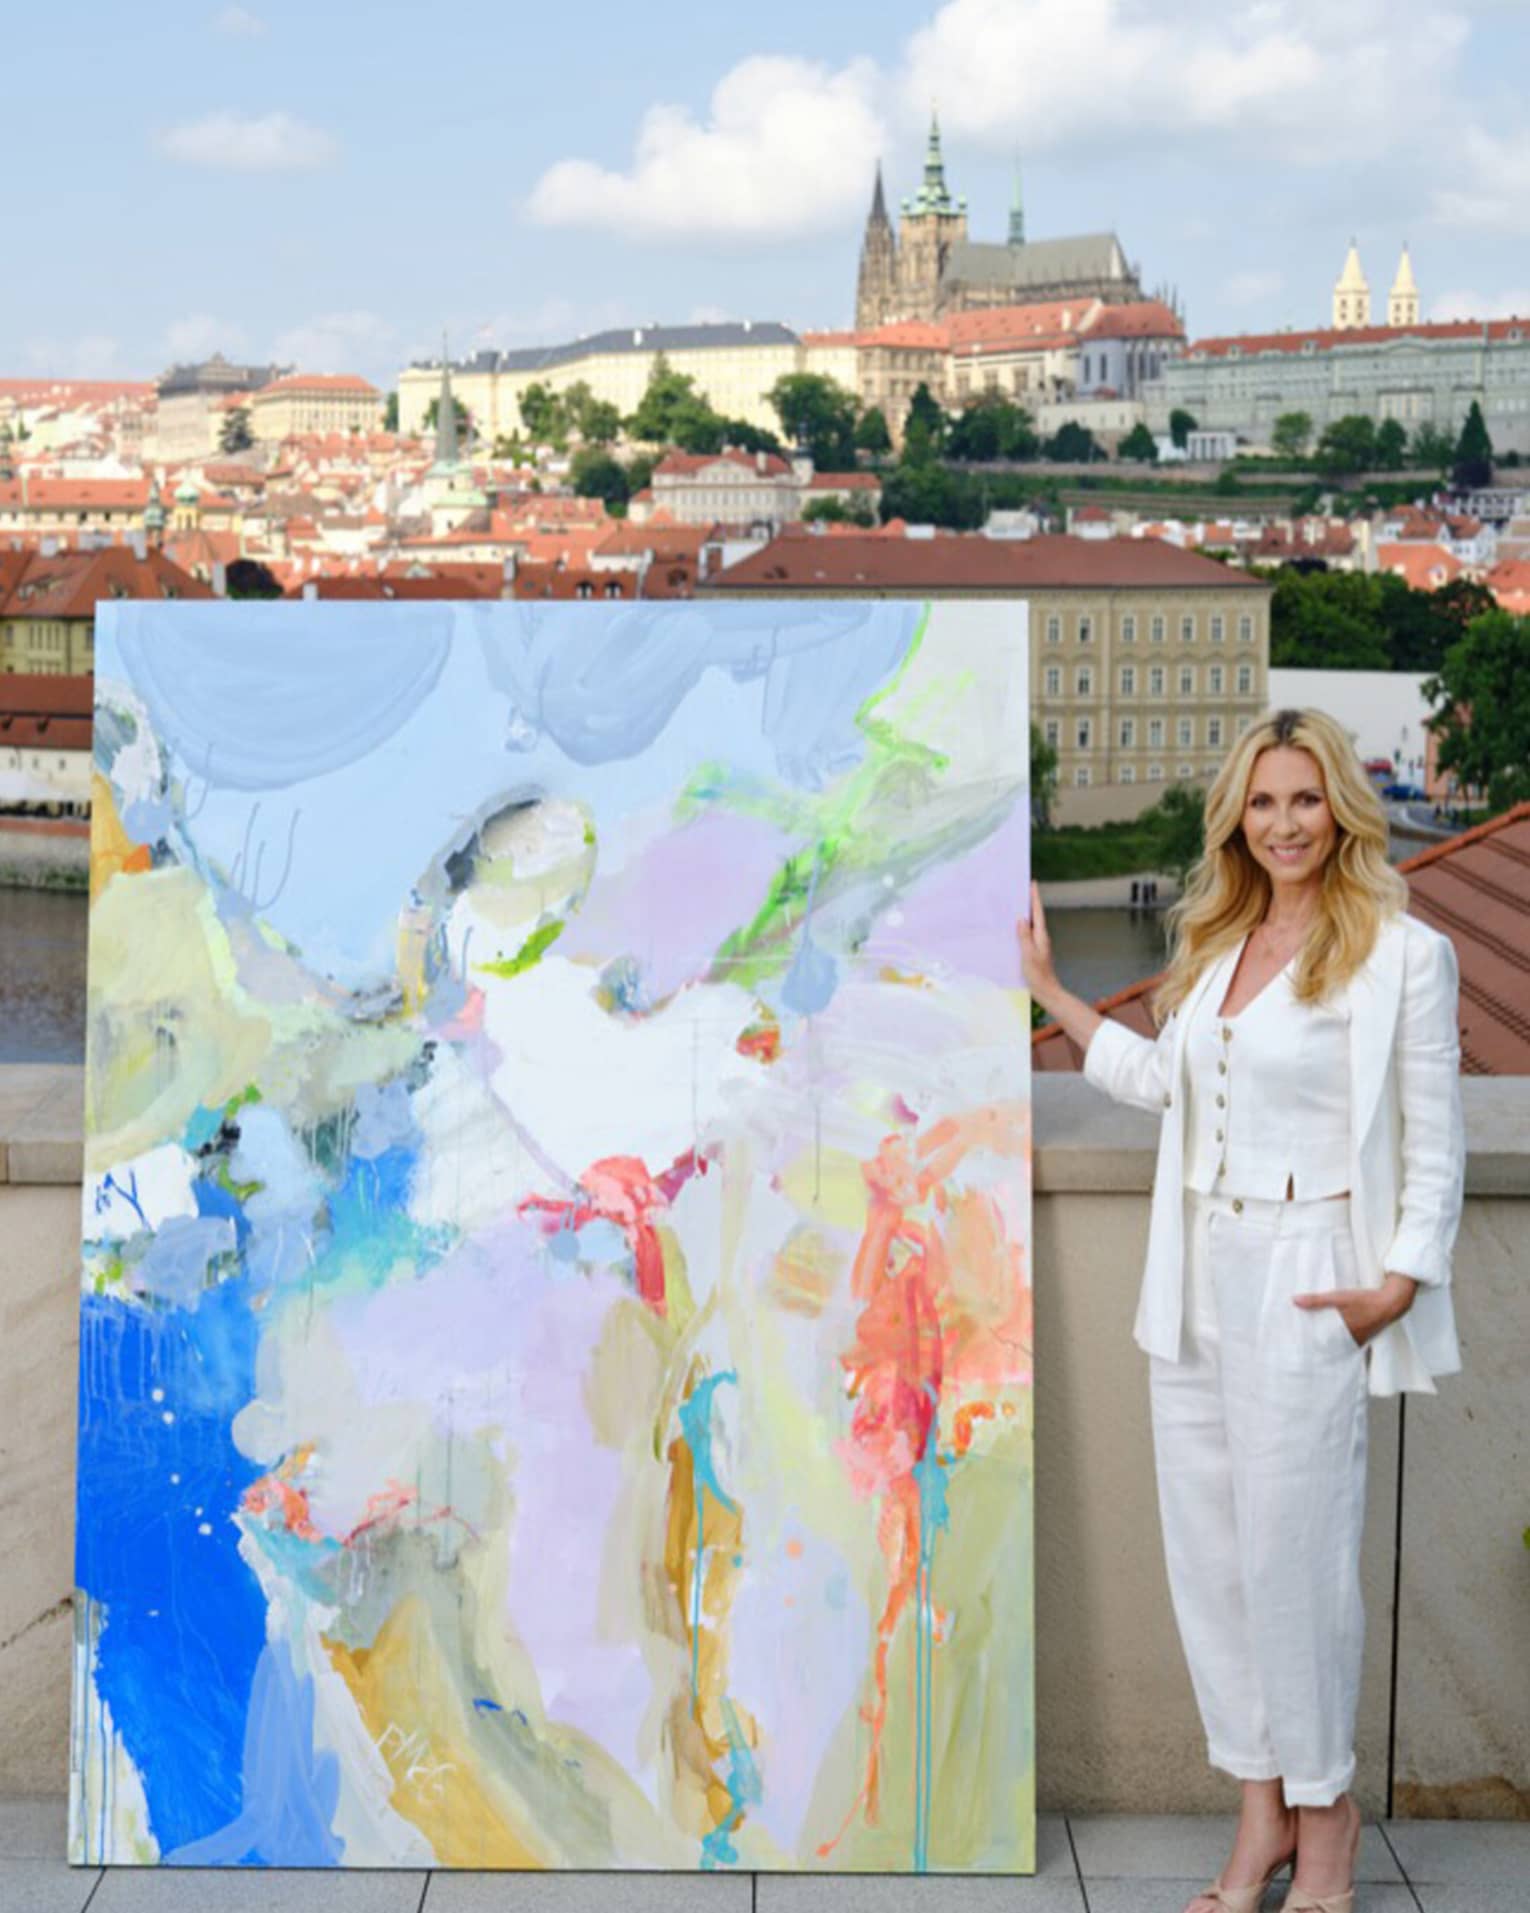 Artist Petra McGrath stands next to a colorful painting on a rooftop overlooking the city of Prague